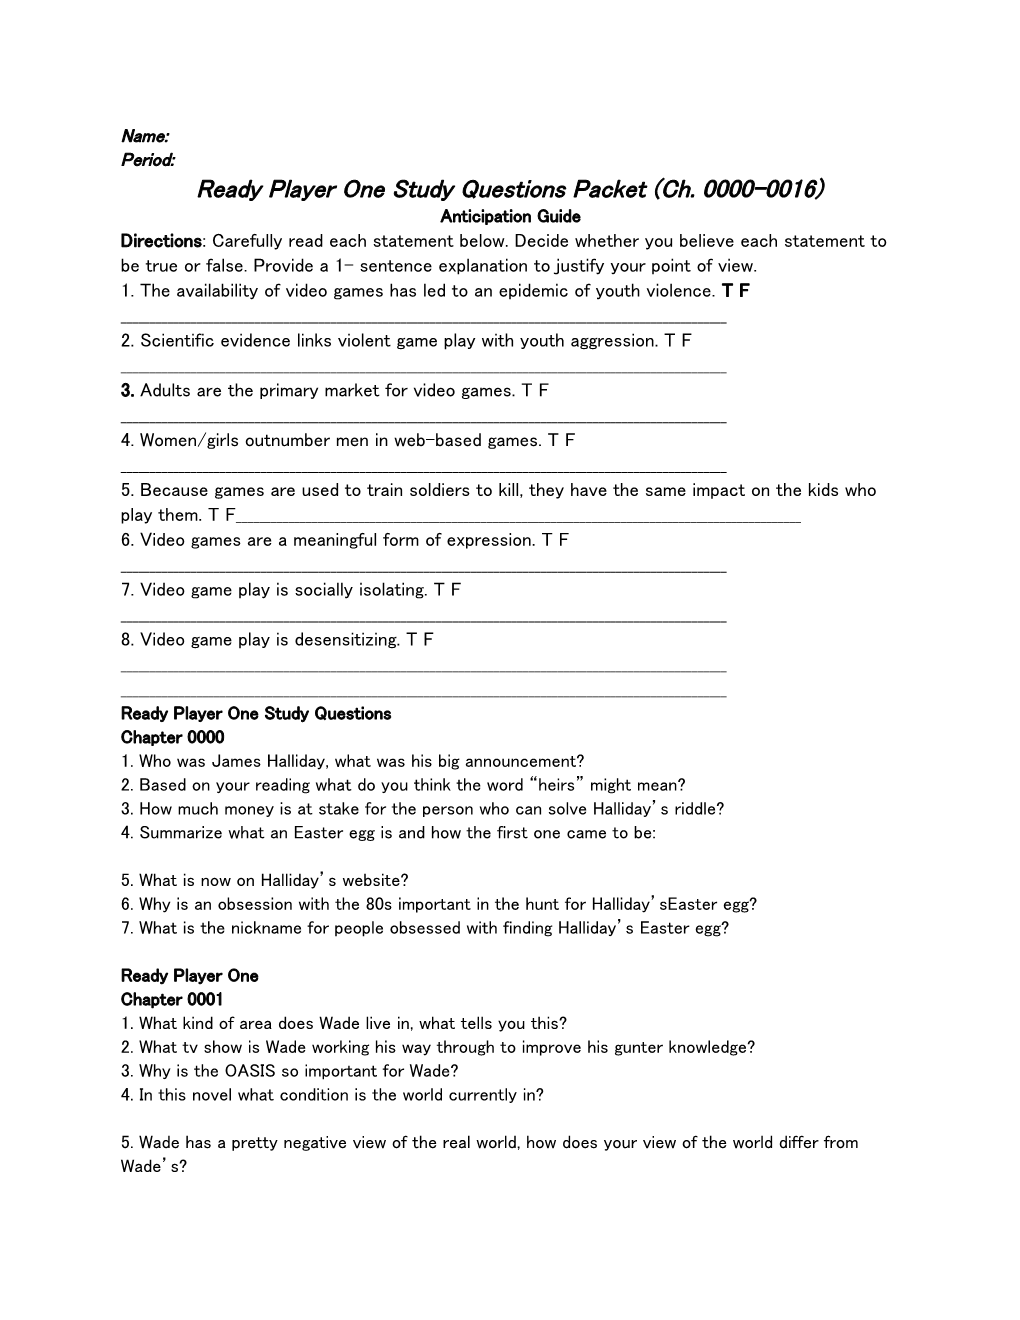 Ready Player One Study Questions Packet (Ch. 0000-0016)